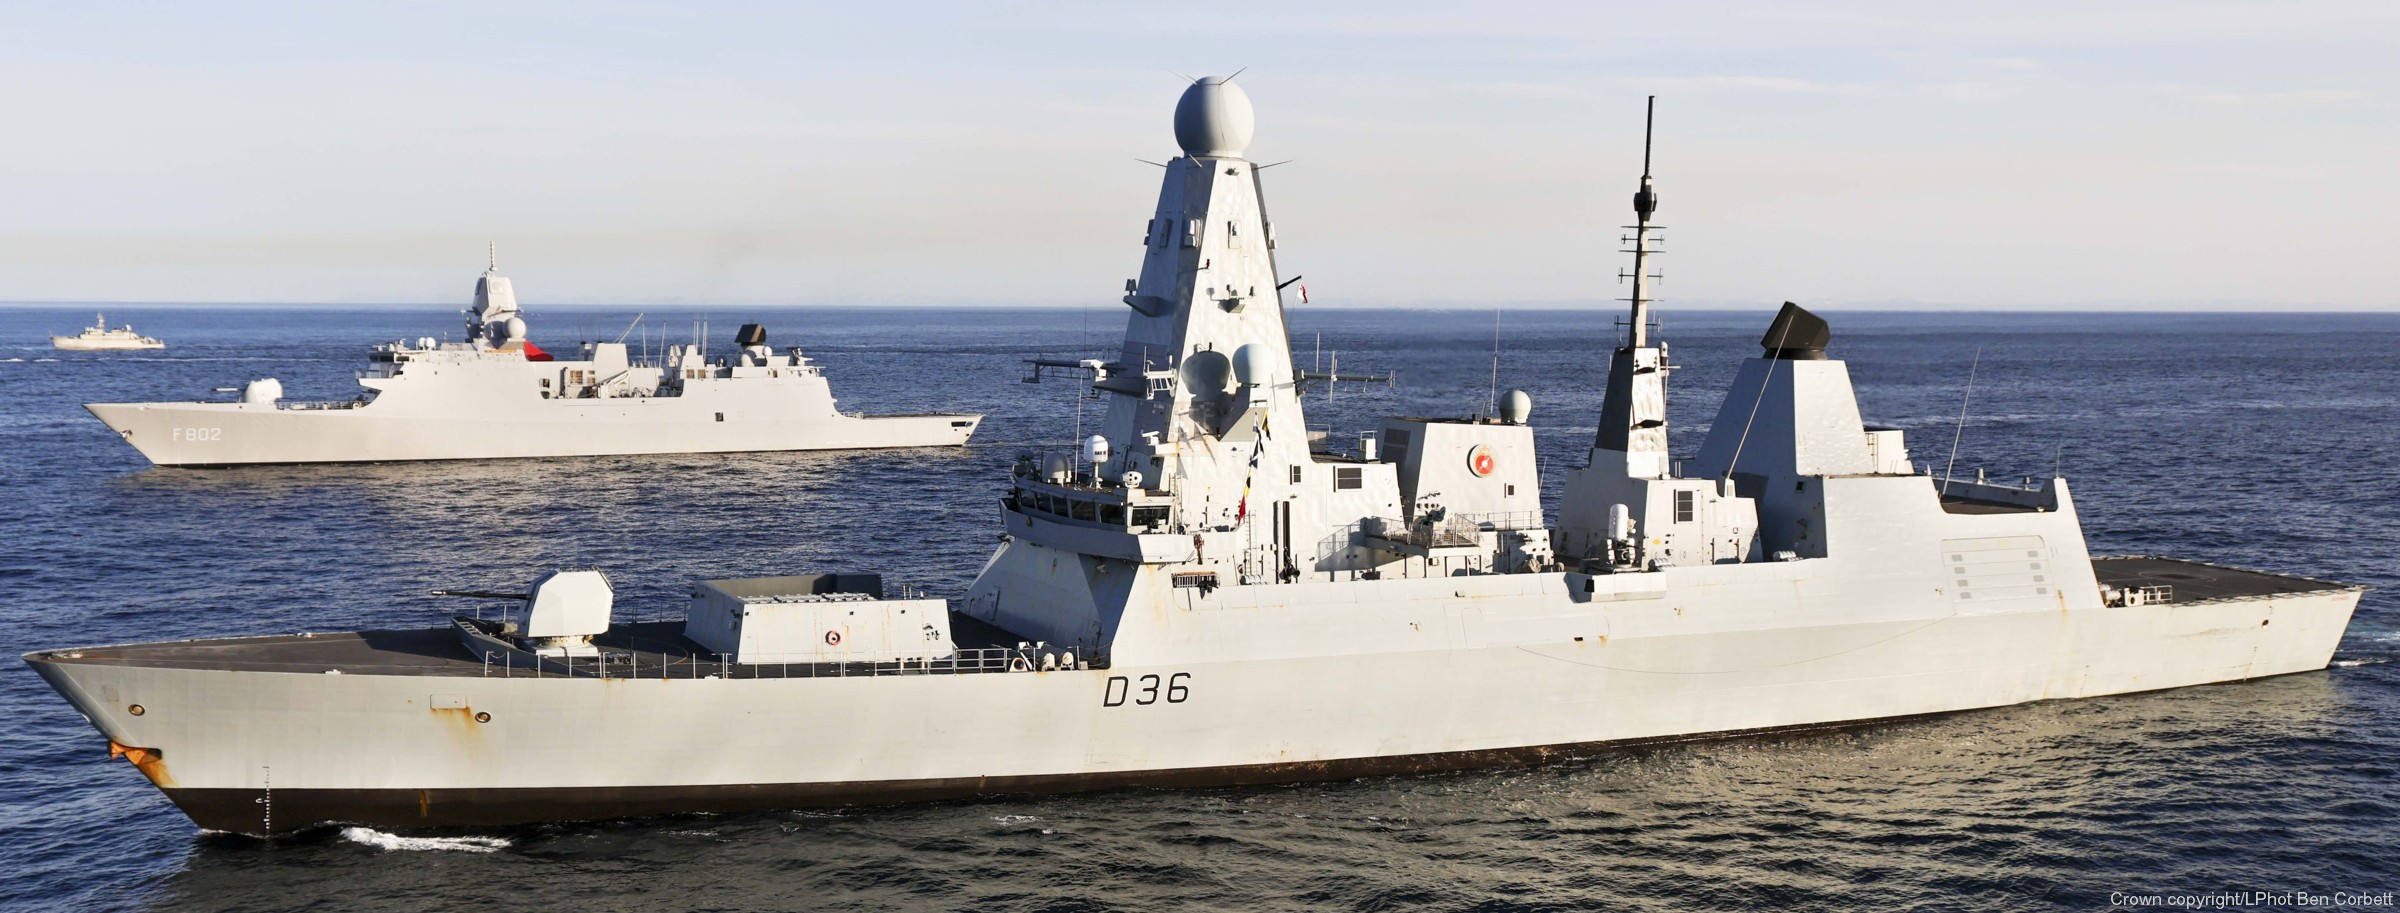 d36 hms defender d-36 type 45 daring class guided missile destroyer ddg royal navy sea viper 32